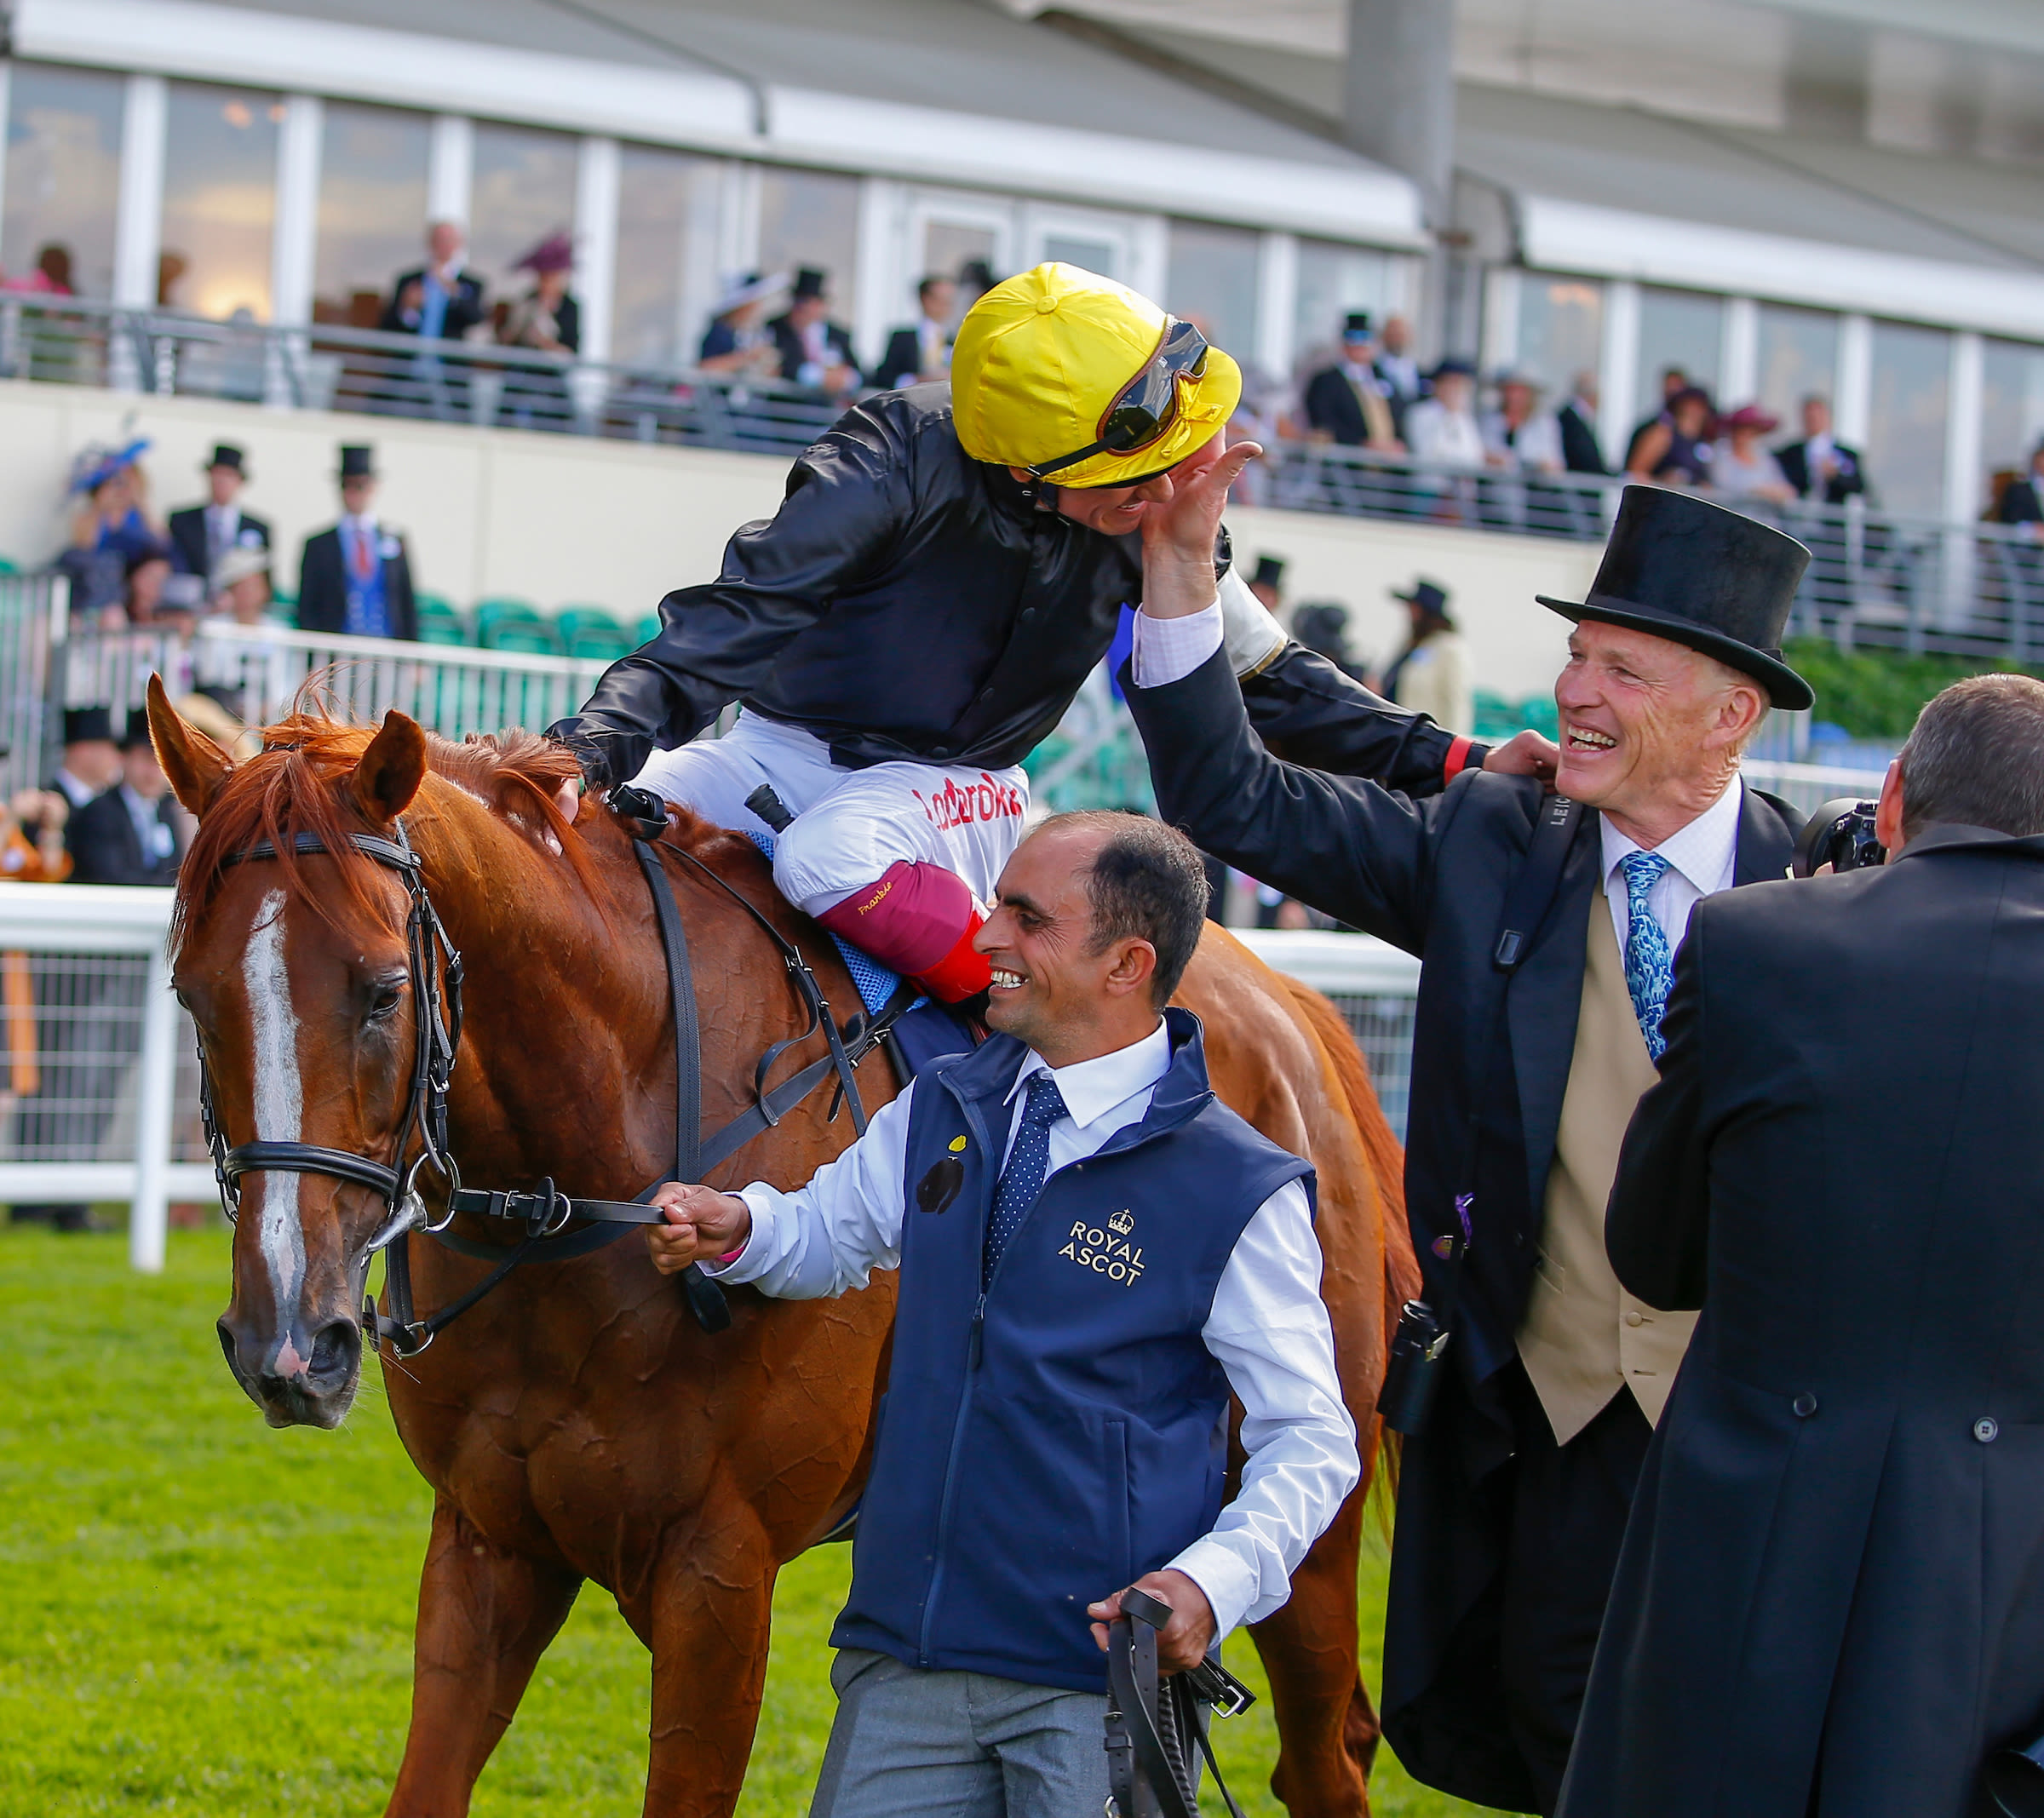  Happier days: Gosden and Dettori are all smiles after landing the Gold Cup with Stradivarius in 2018 (focusonracing.com)